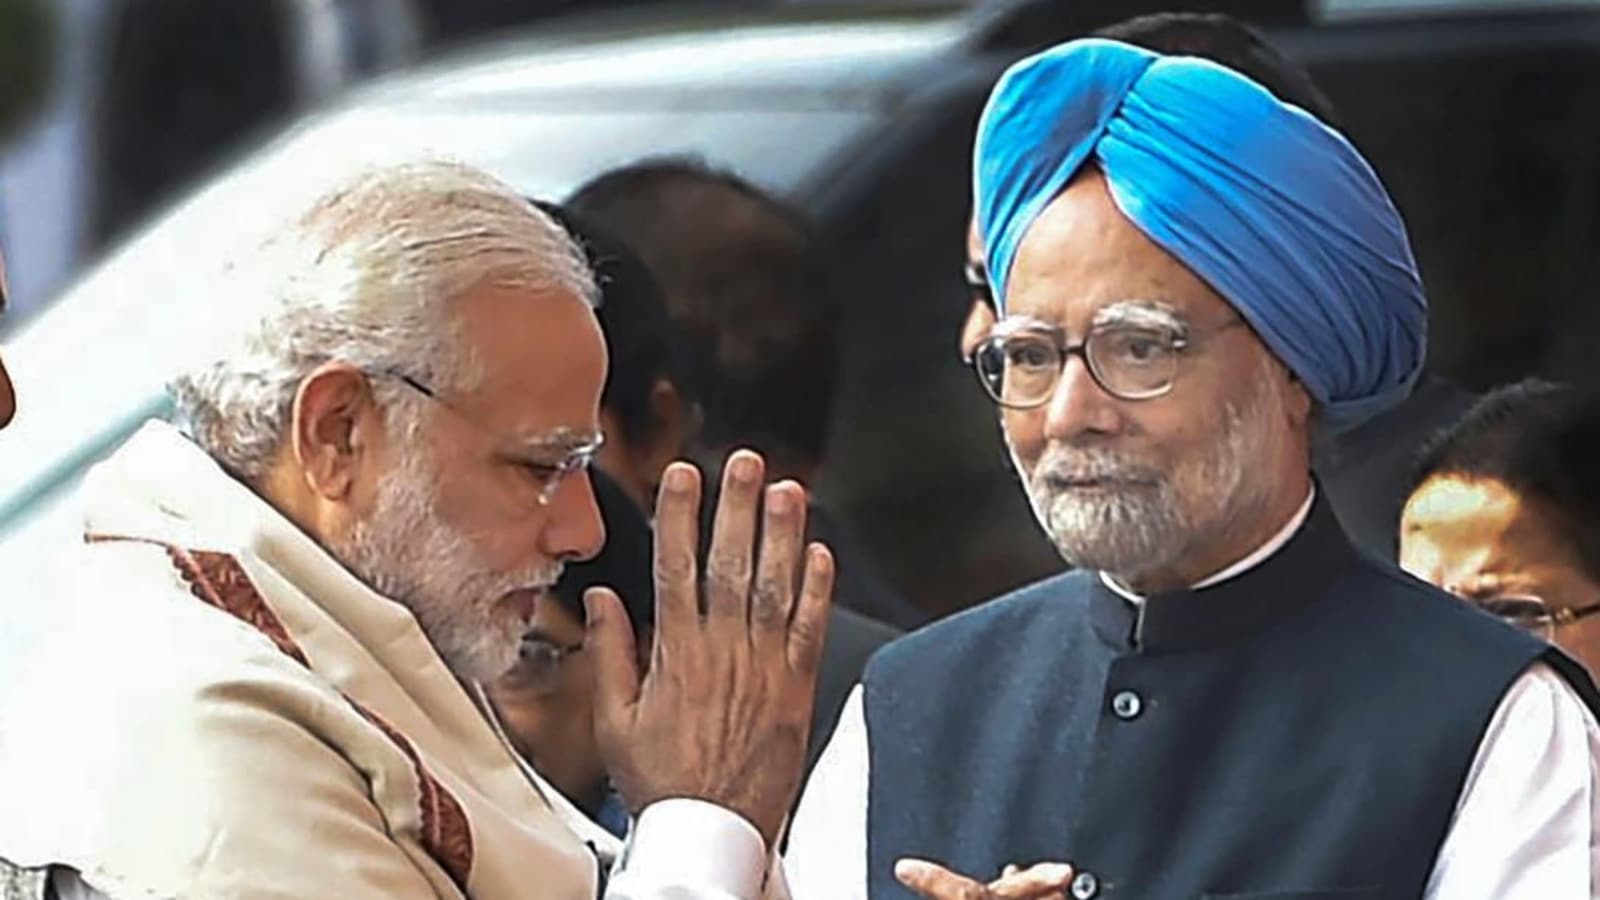 COVID-19: Modi speaks to Sonia, Manmohan, other leaders - The Economic Times